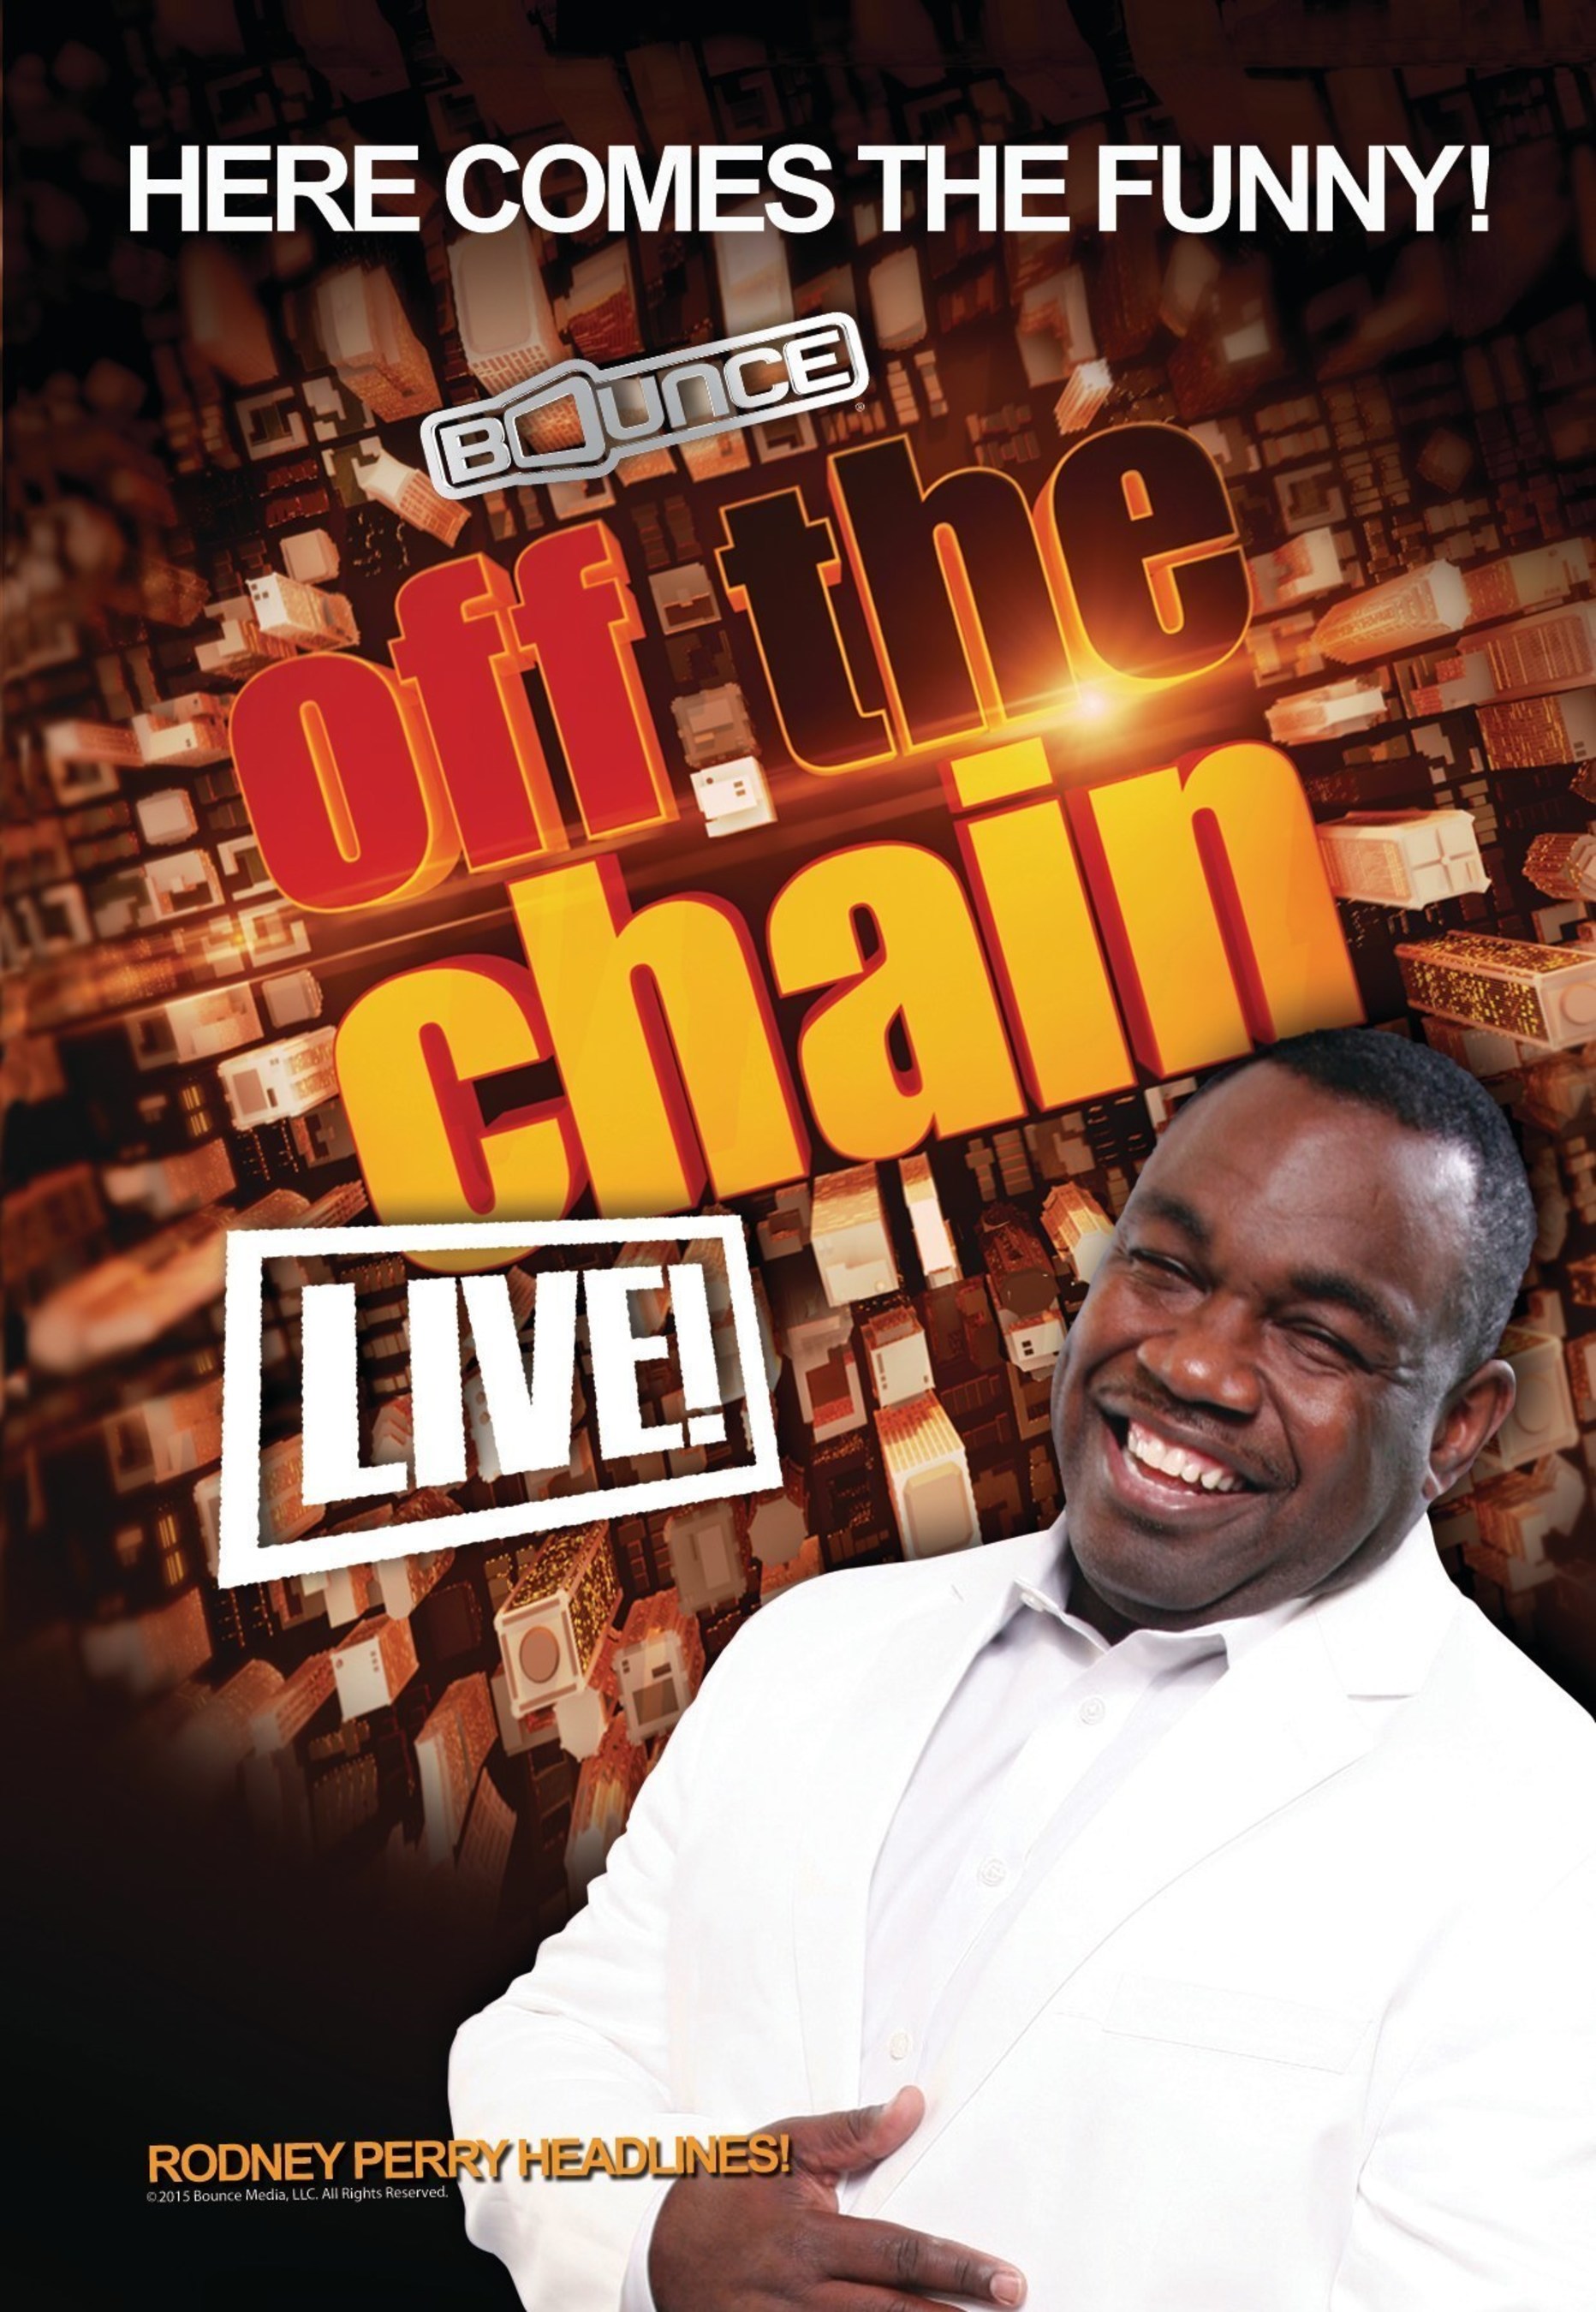 Rodney Perry headlines Bounce TV's "Off The Chain Live!" Comedy Tour 2015. "Off The Chain" is Bounce TV's family-friendly comedy show featuring some of the most hilarious African-American comedians on the stand-up scene. Bounce TV airs on the digital signals of local television stations with corresponding cable carriage. Visit BounceTV.com for more information.